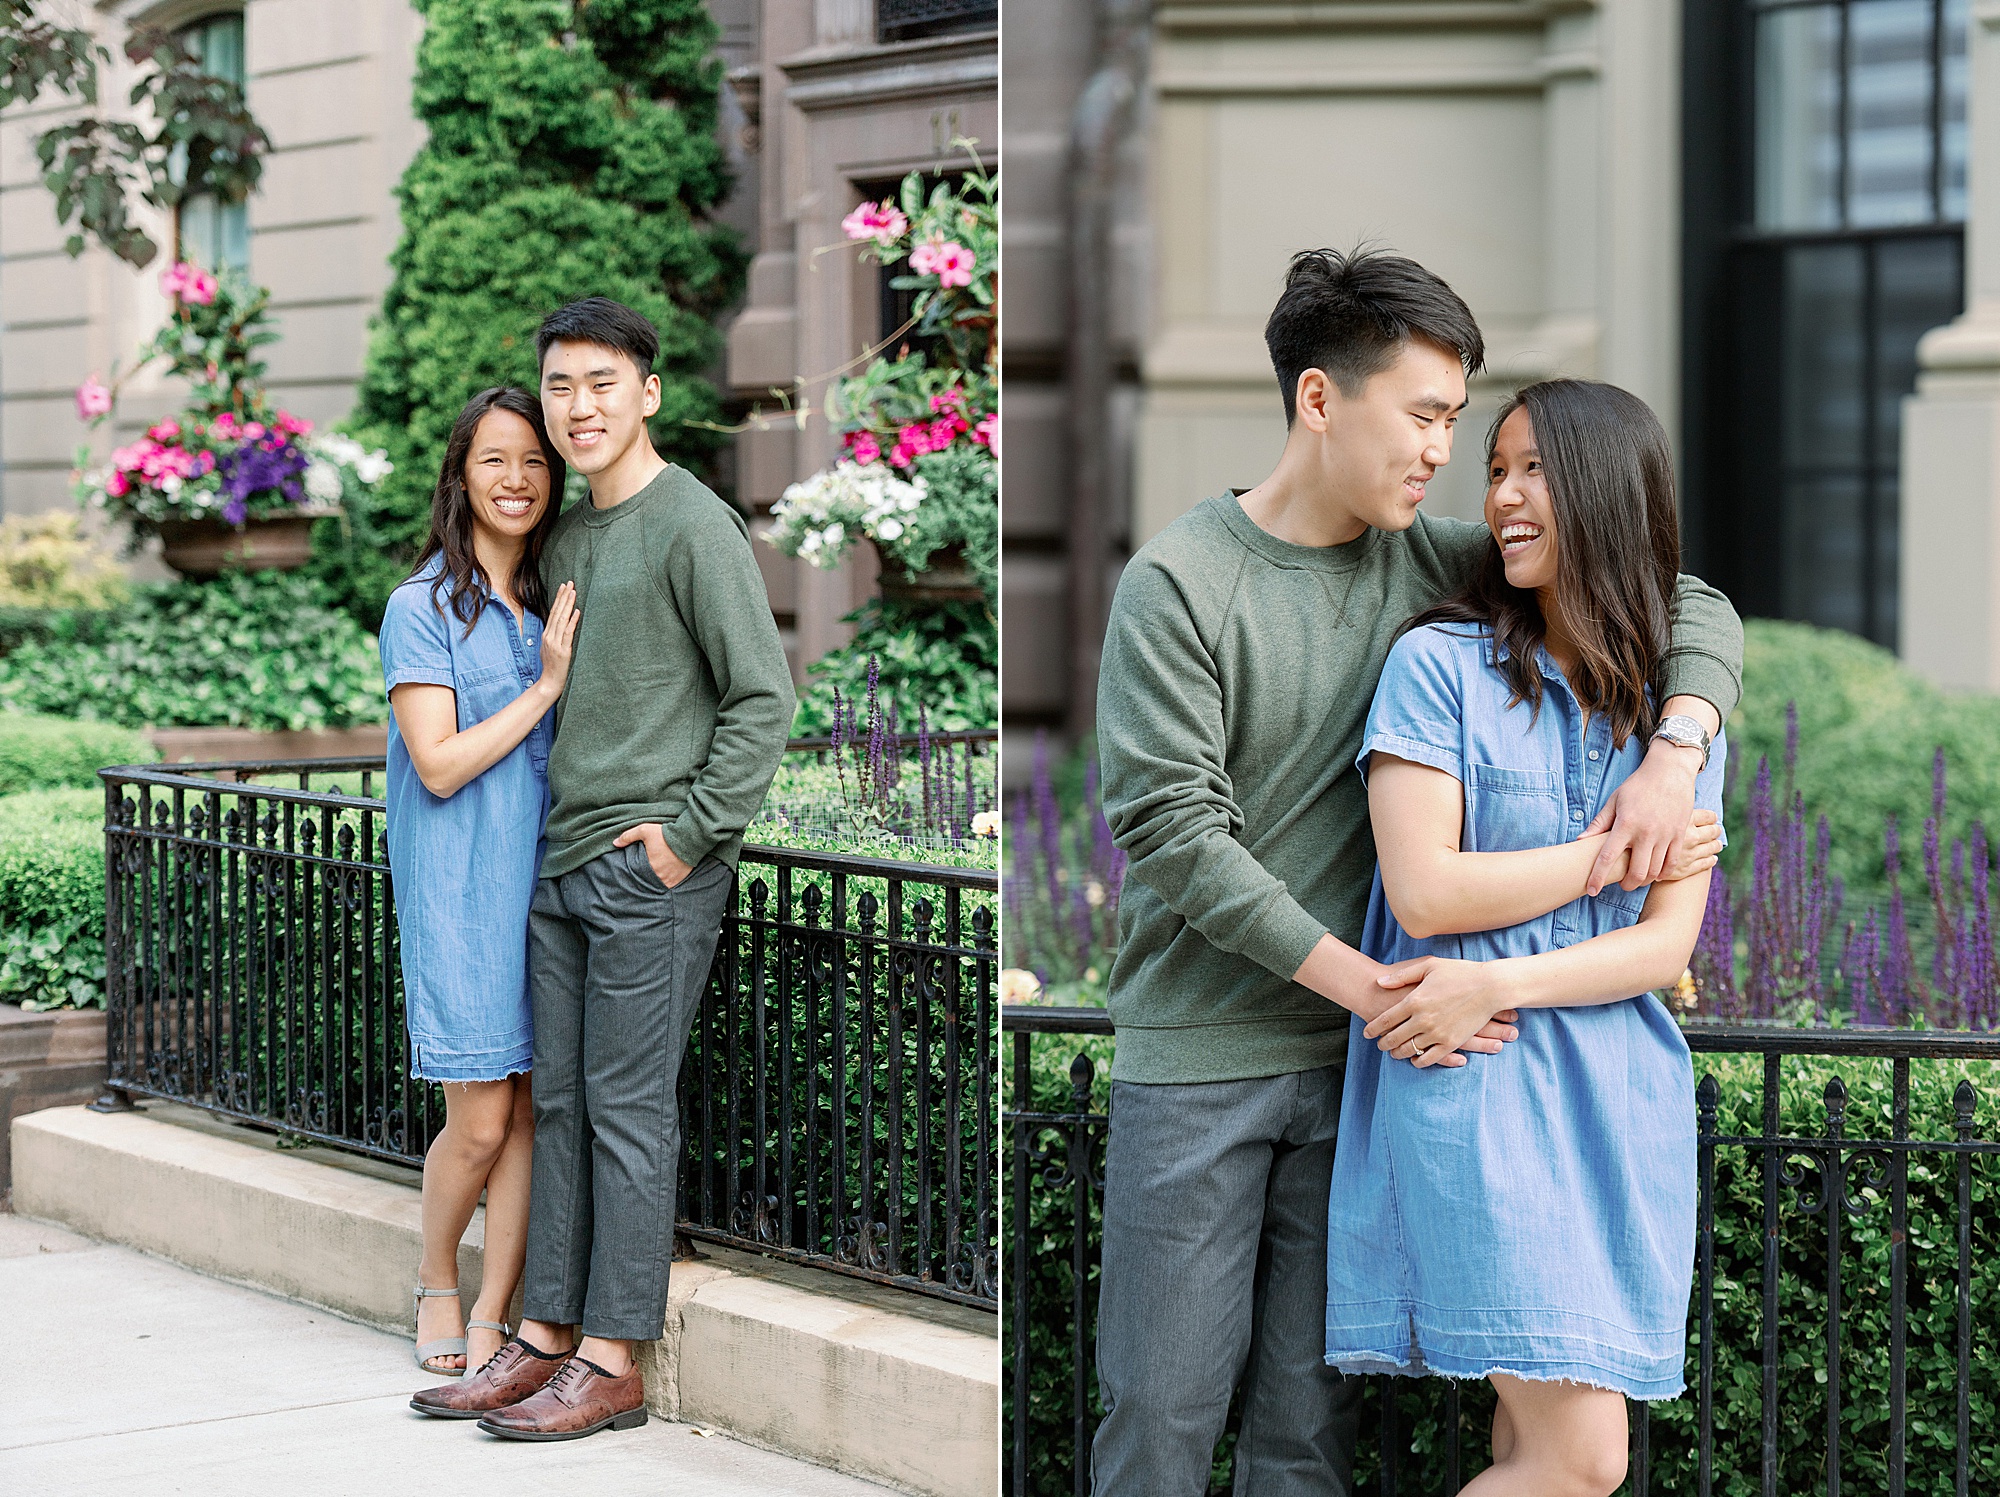 Comm Ave Mall Engagement Session sunrise Boston by Lynne Reznick Photography